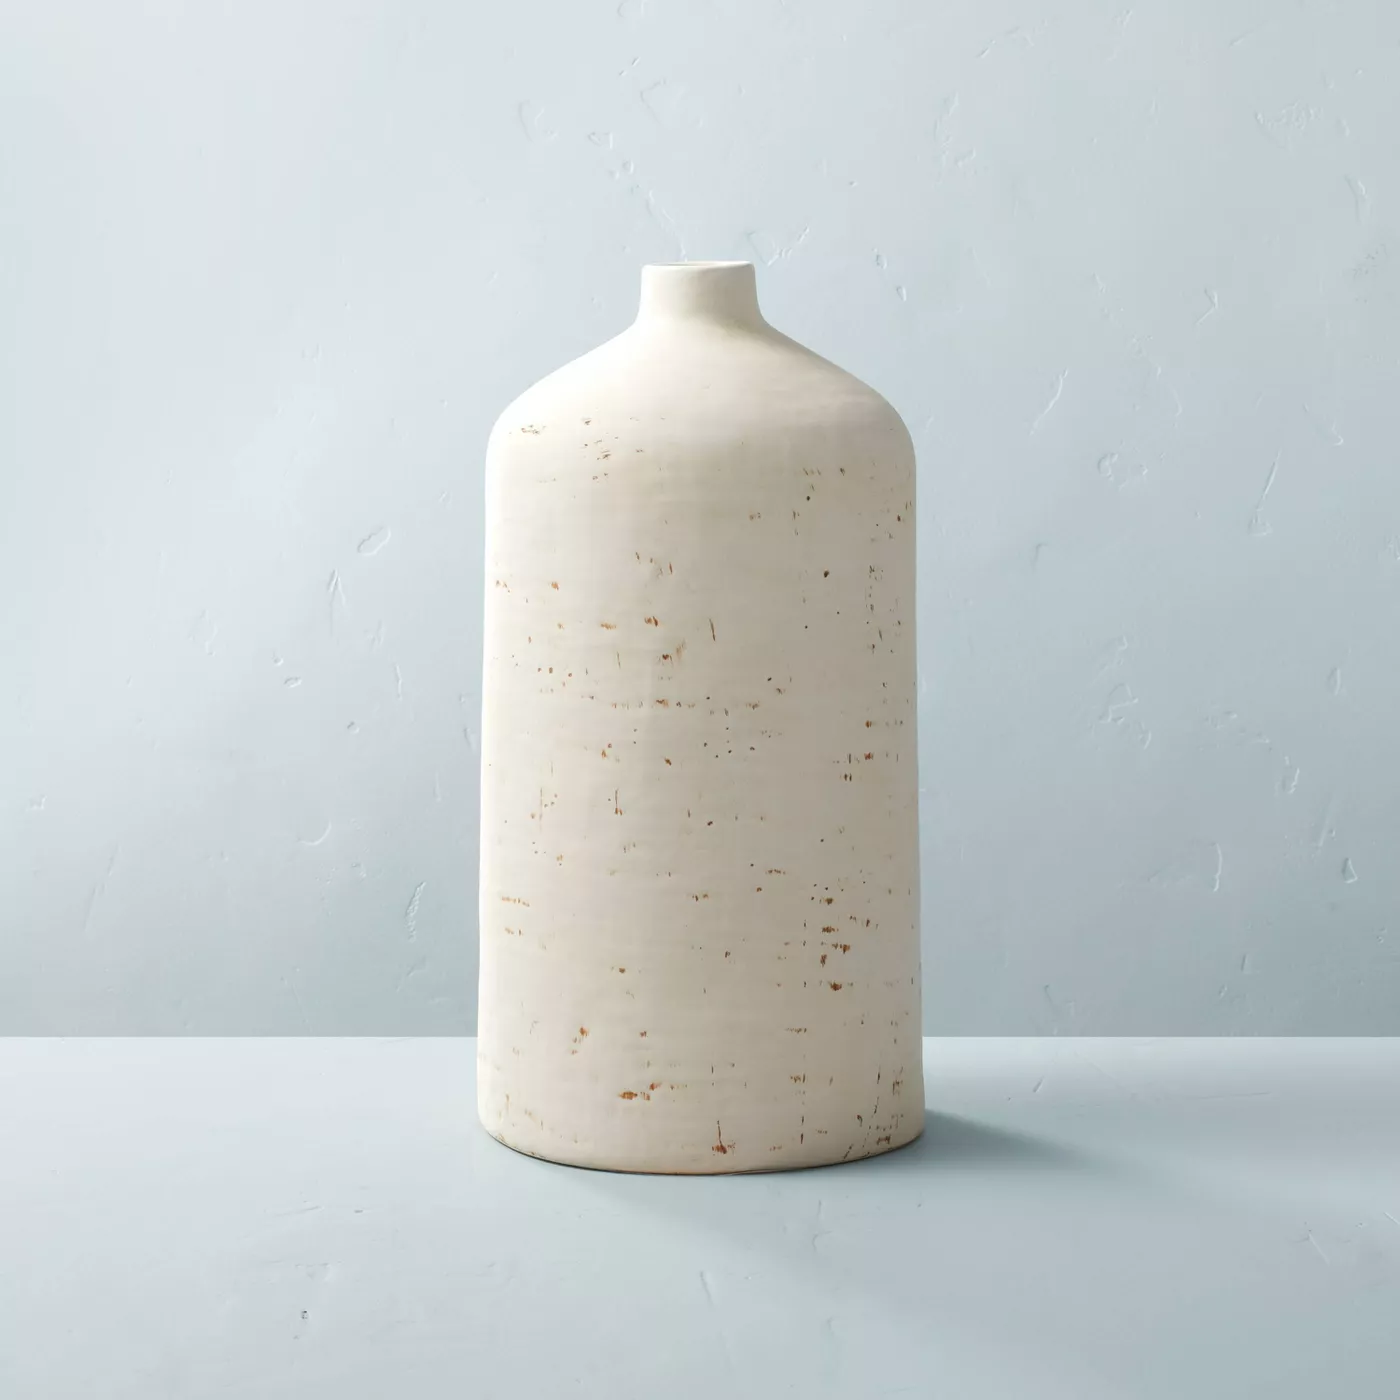 Distressed Ceramic Vase Natural White - Hearth & Hand™ with Magnolia - image 1 of 11